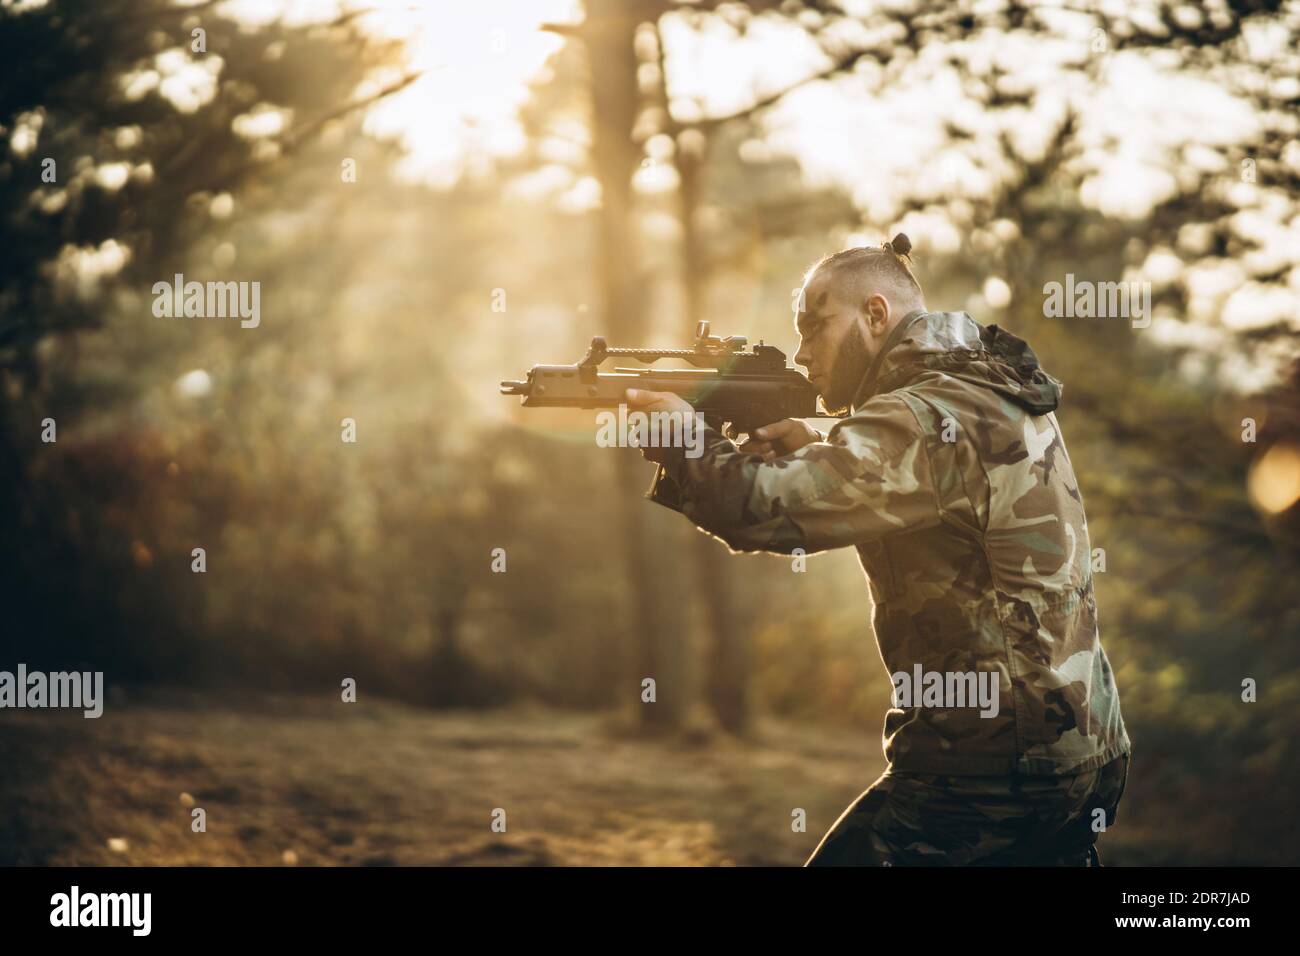 Side View Of Army Soldier Aiming Gun In Forest Stock Photo